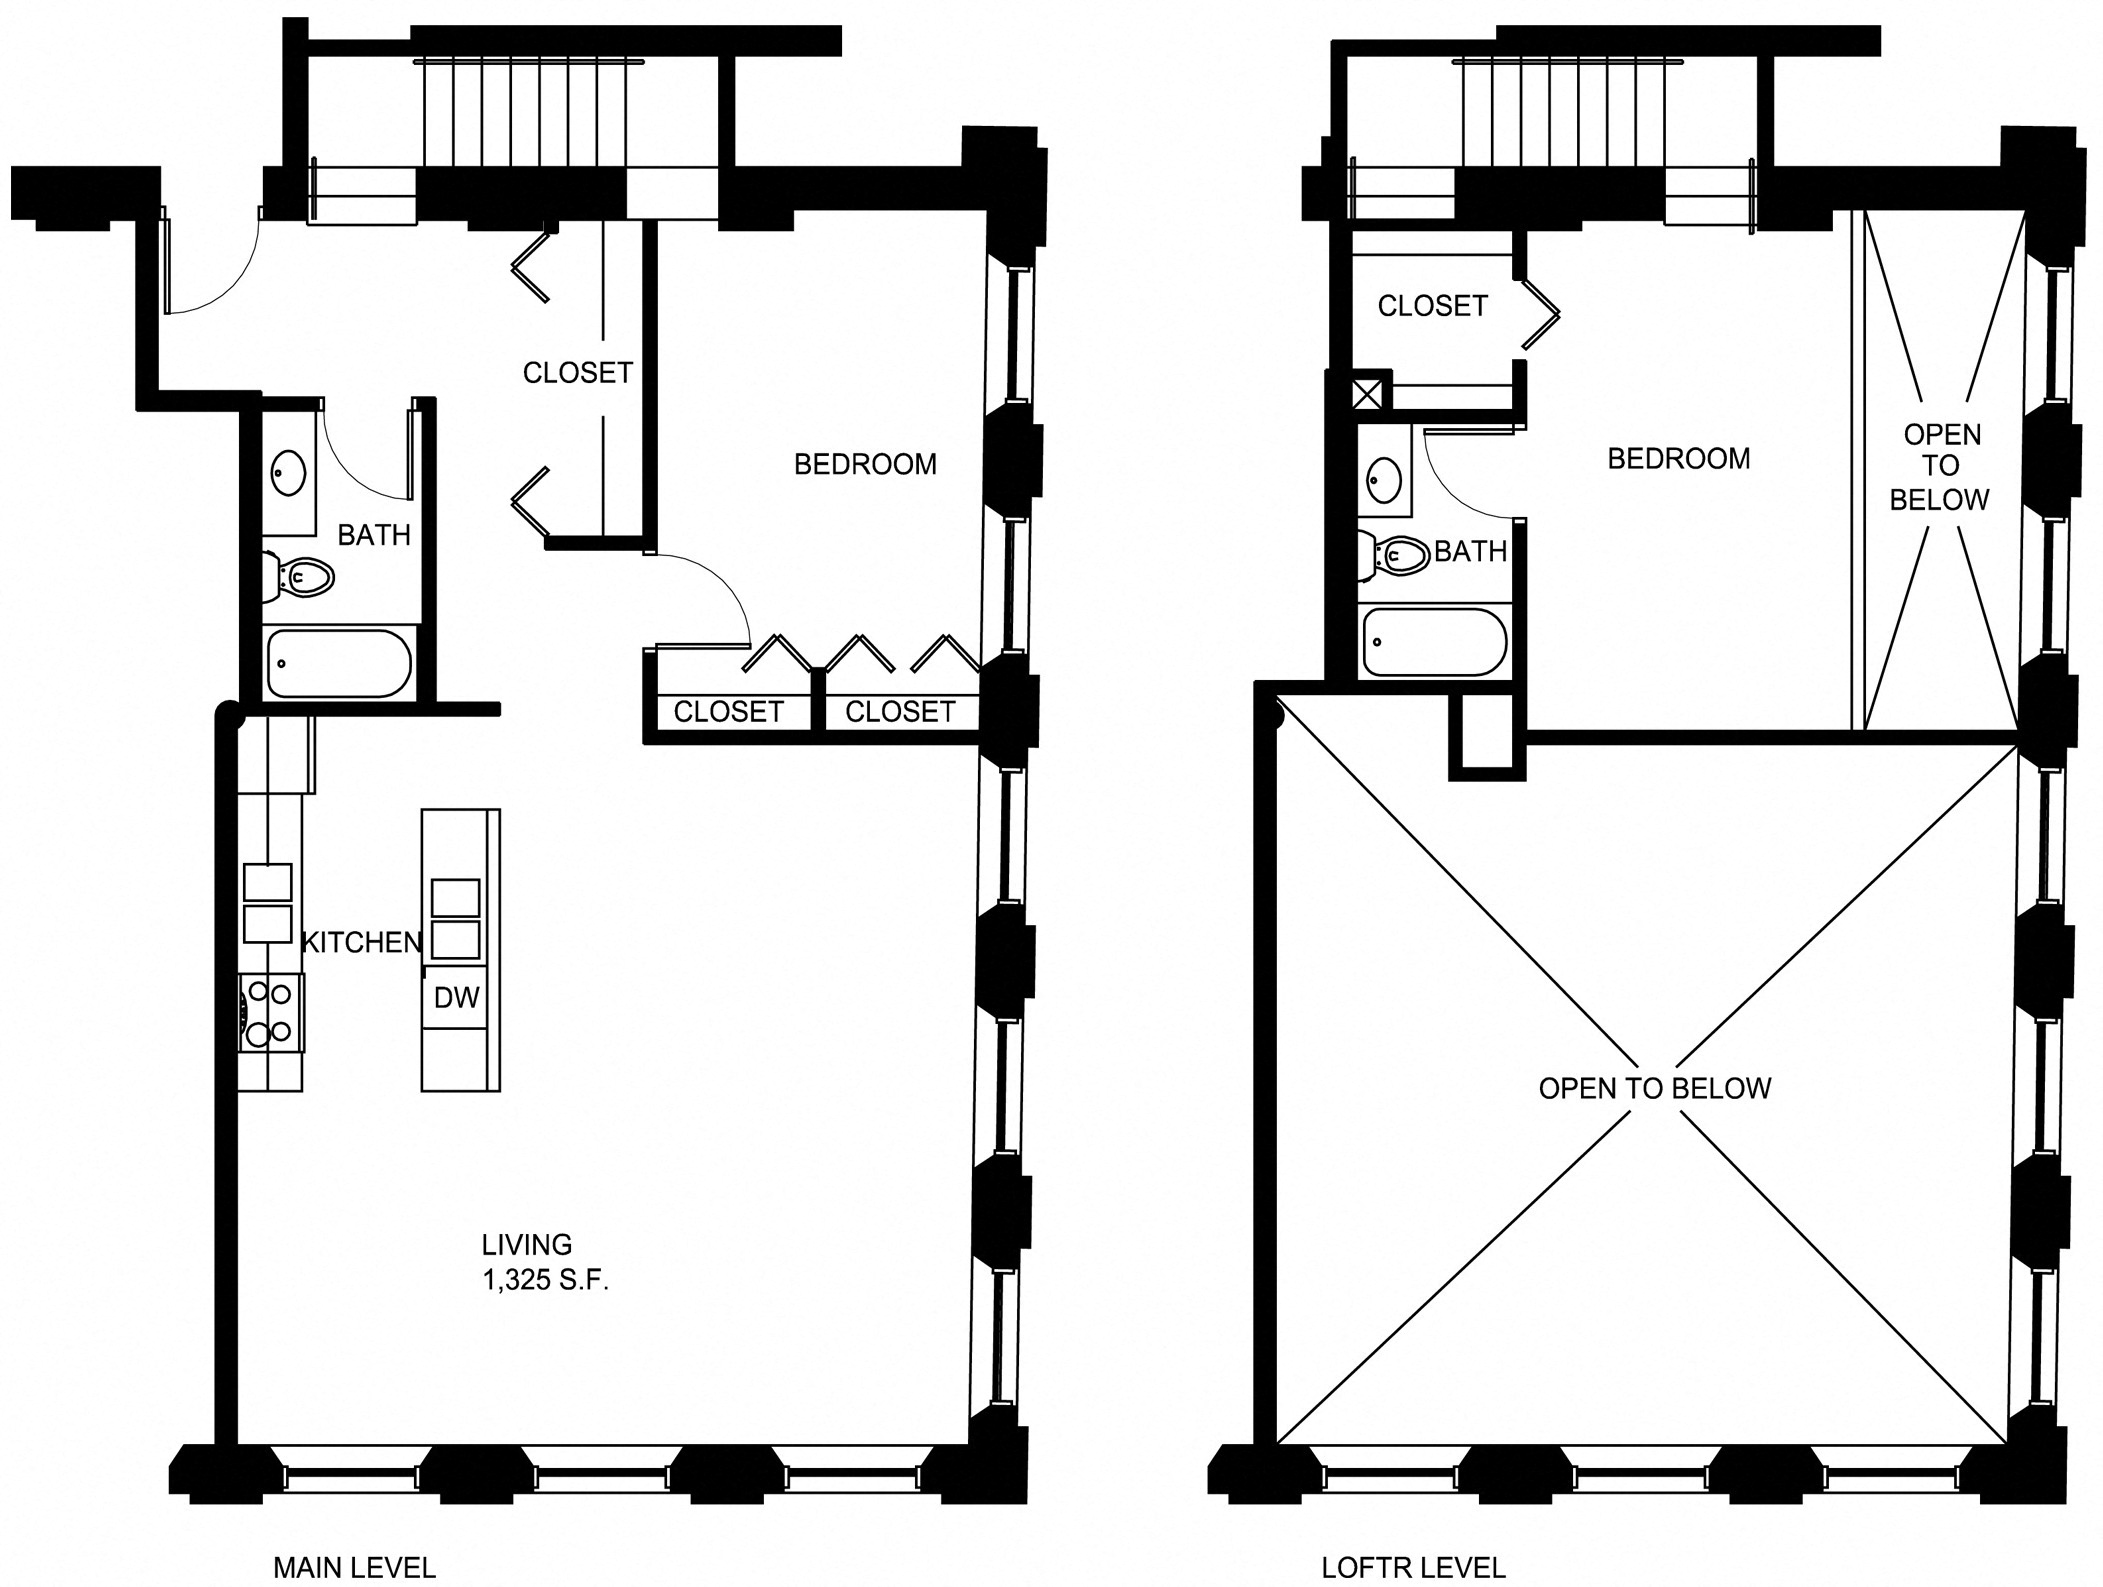 Floorplan for Apartment #P536, 2 bedroom unit at Halstead Providence